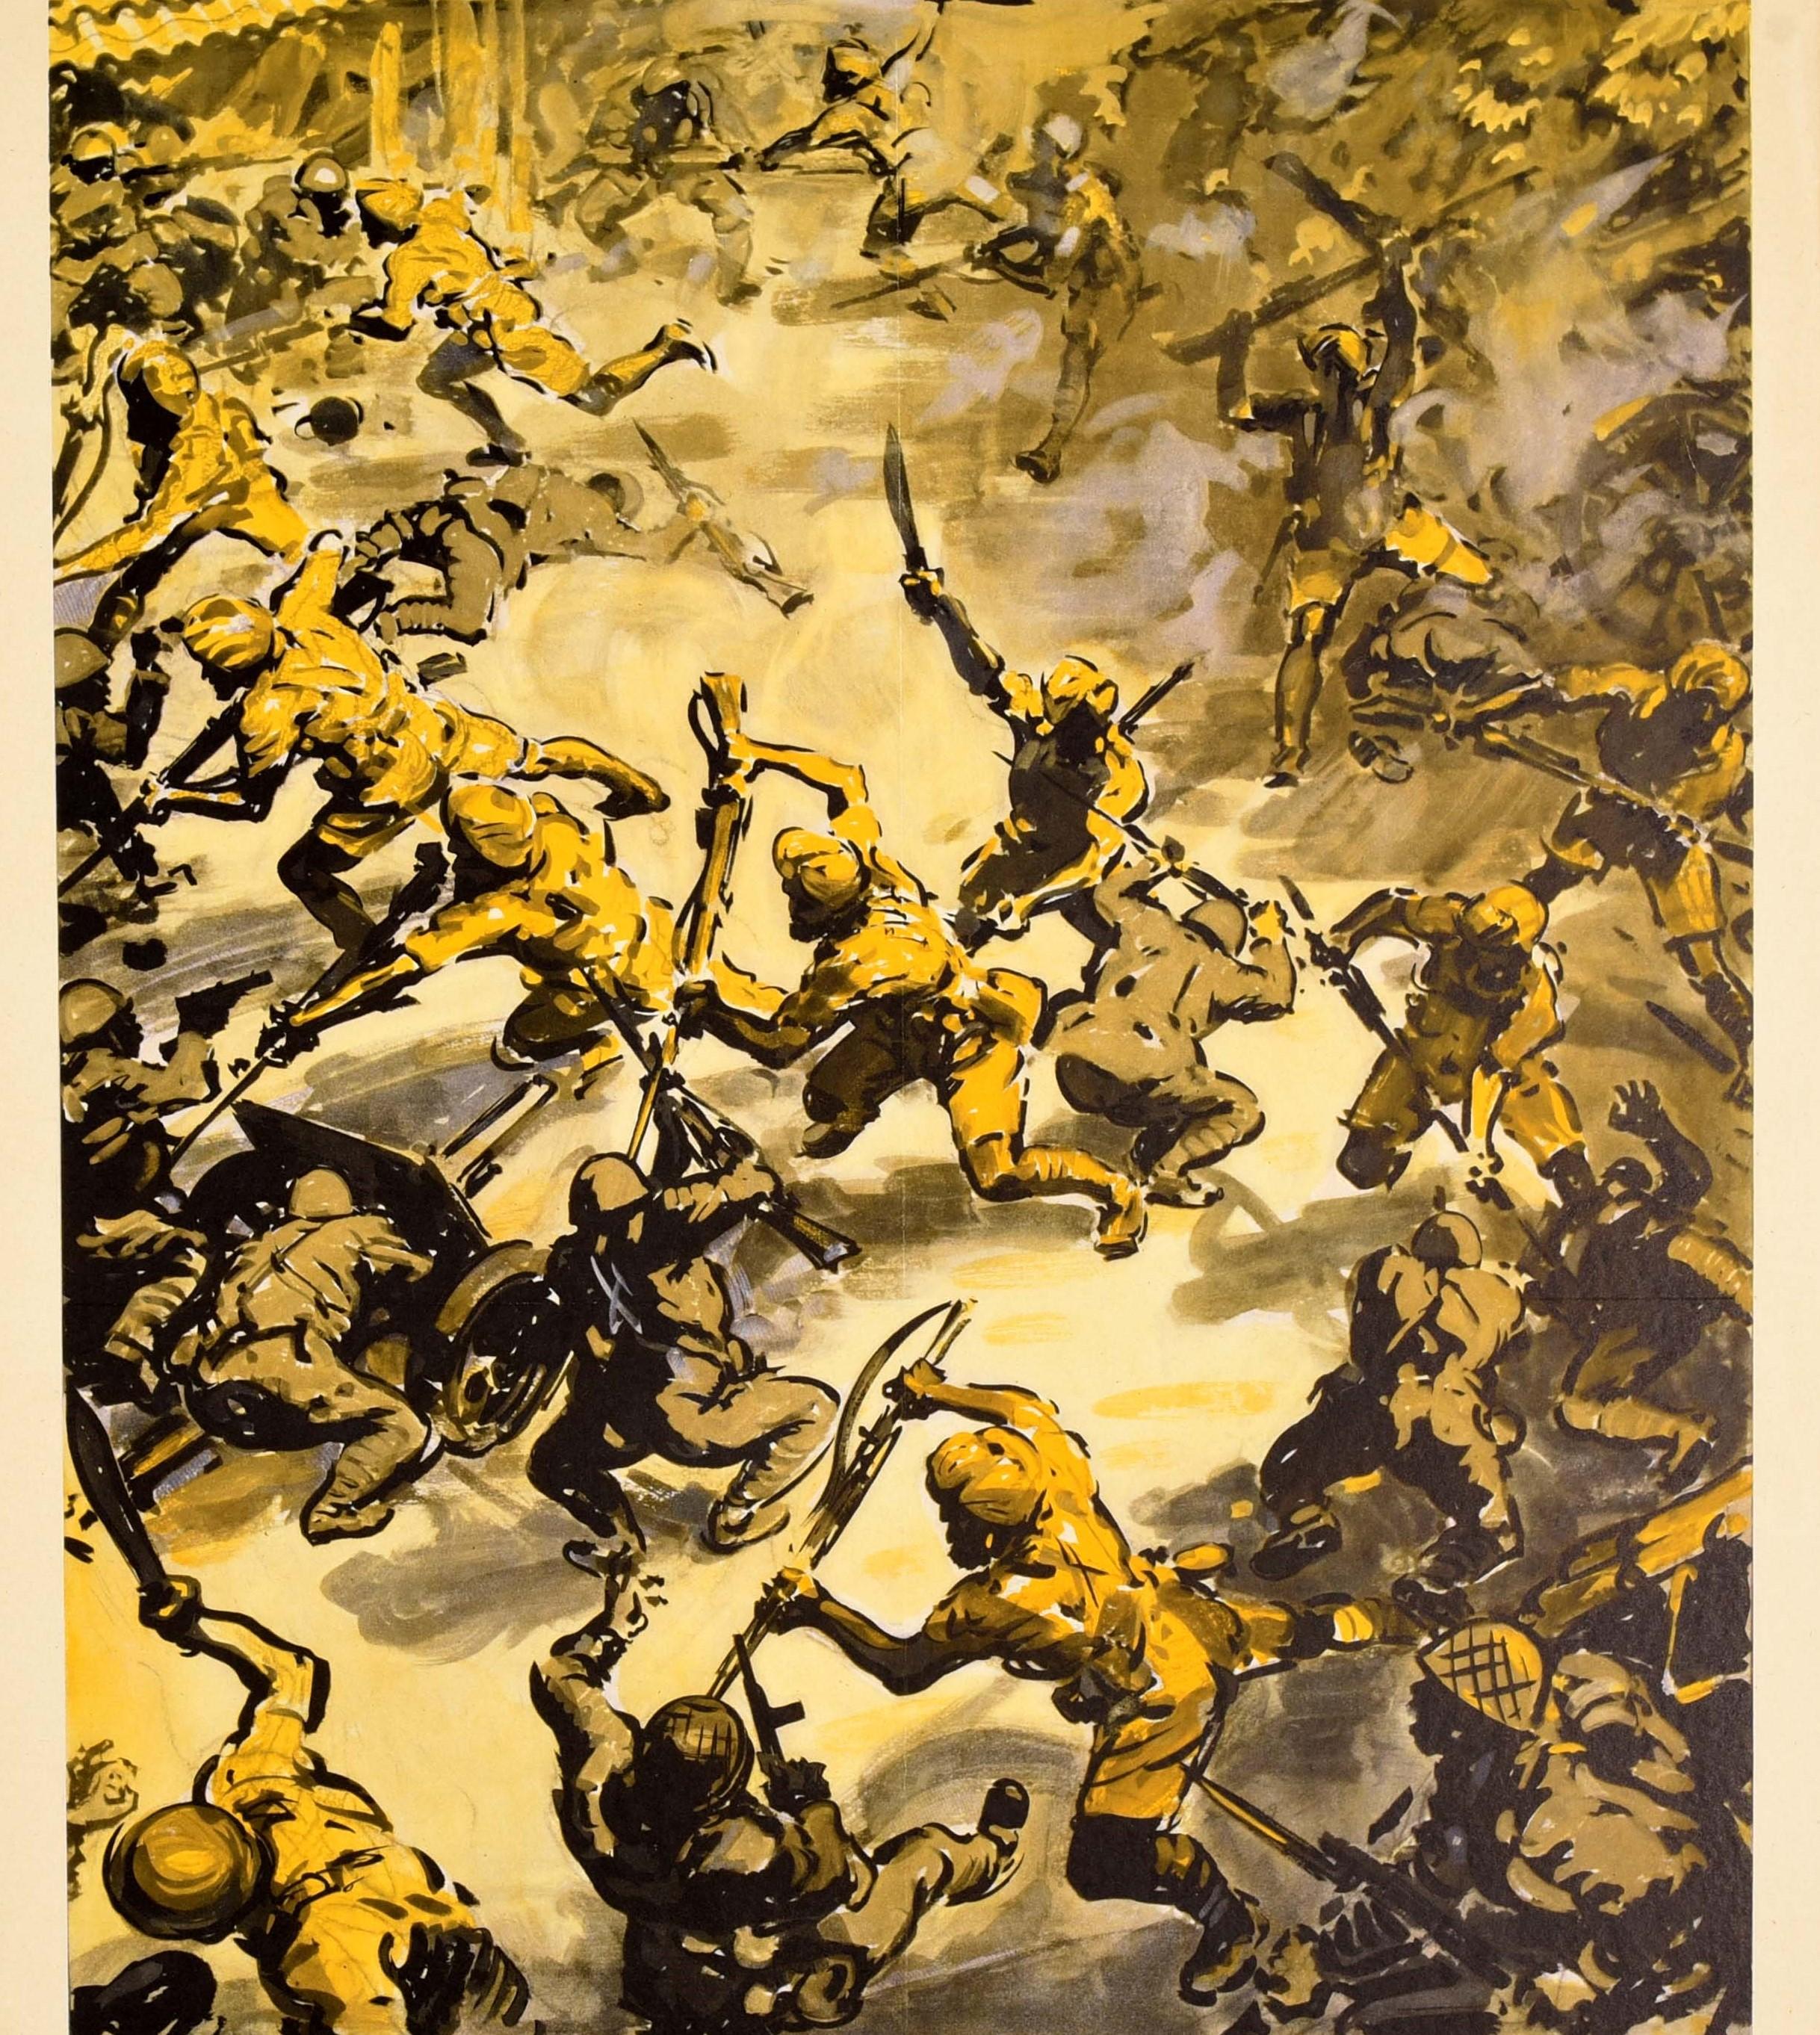 British Original Vintage Poster The Storming Of Shwegyin By Indian Troops WWII Battle For Sale